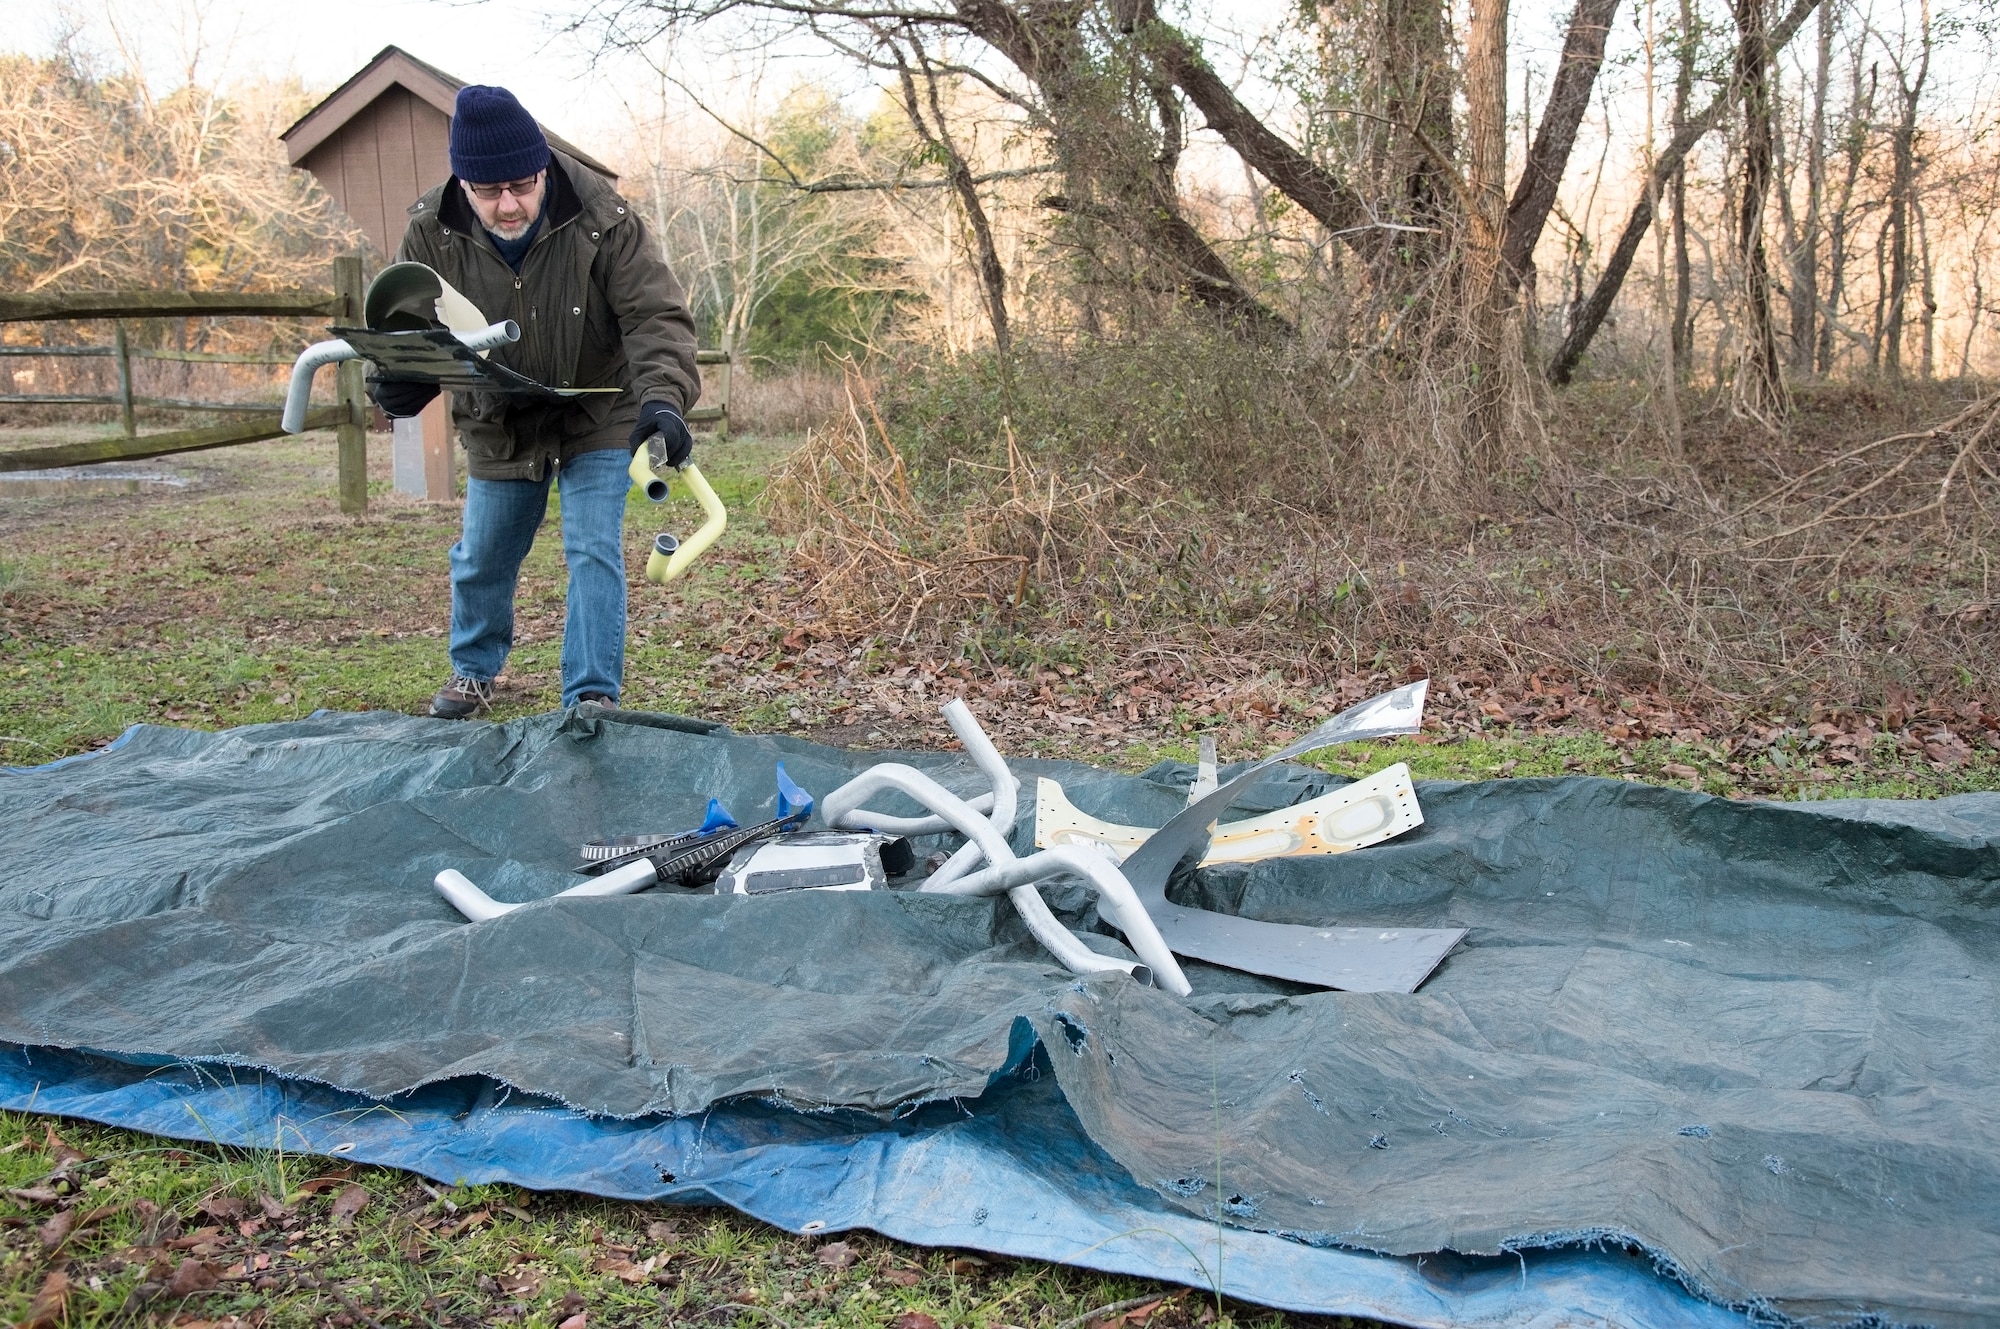 Simon Lowe, 436th Civil Engineer Squadron engineering technician, places condemned aircraft parts on a tarp prior to an aircraft mishap survey exercise Dec. 18, 2018, near Killens Pond State Park, Kent County, Del. Lowe placed about 45 miscellaneous aircraft and aircrew items for 436th CES engineering assistants to practice plotting and documenting the items using GPS equipment and a digital camera. (U.S. Air Force photo by Roland Balik)